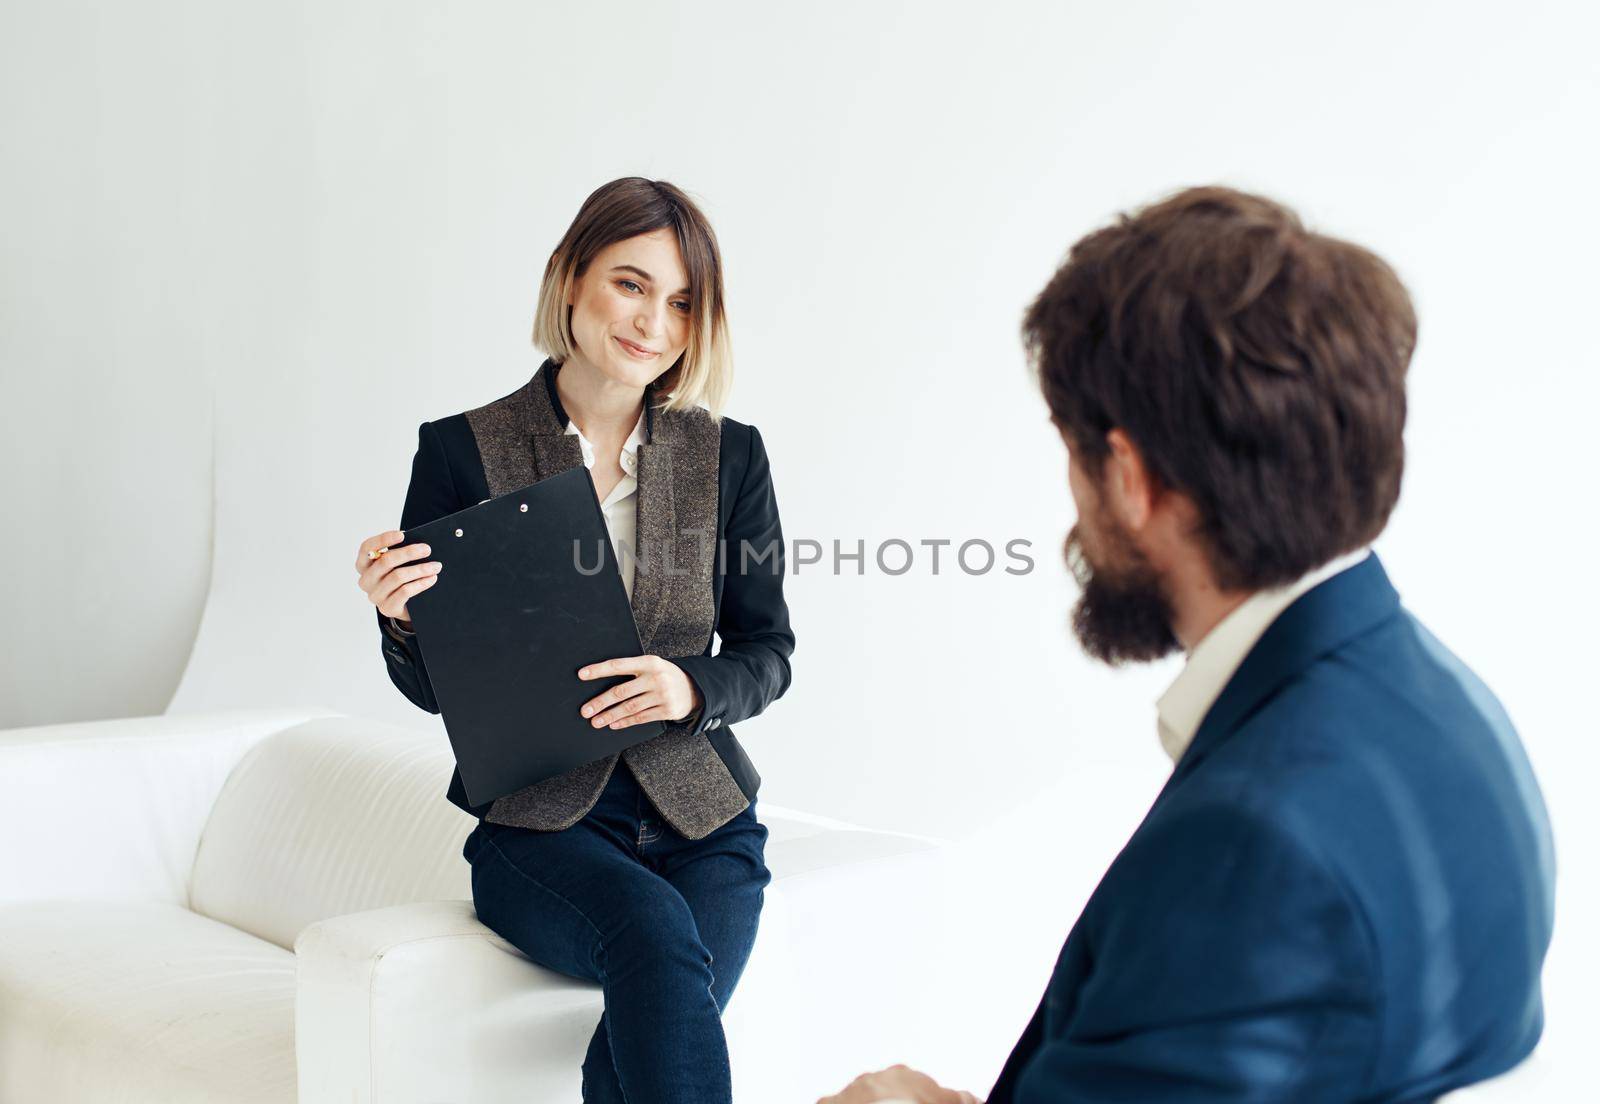 A man in a blue jacket sits opposite a woman in a suit on a light background indoors. High quality photo